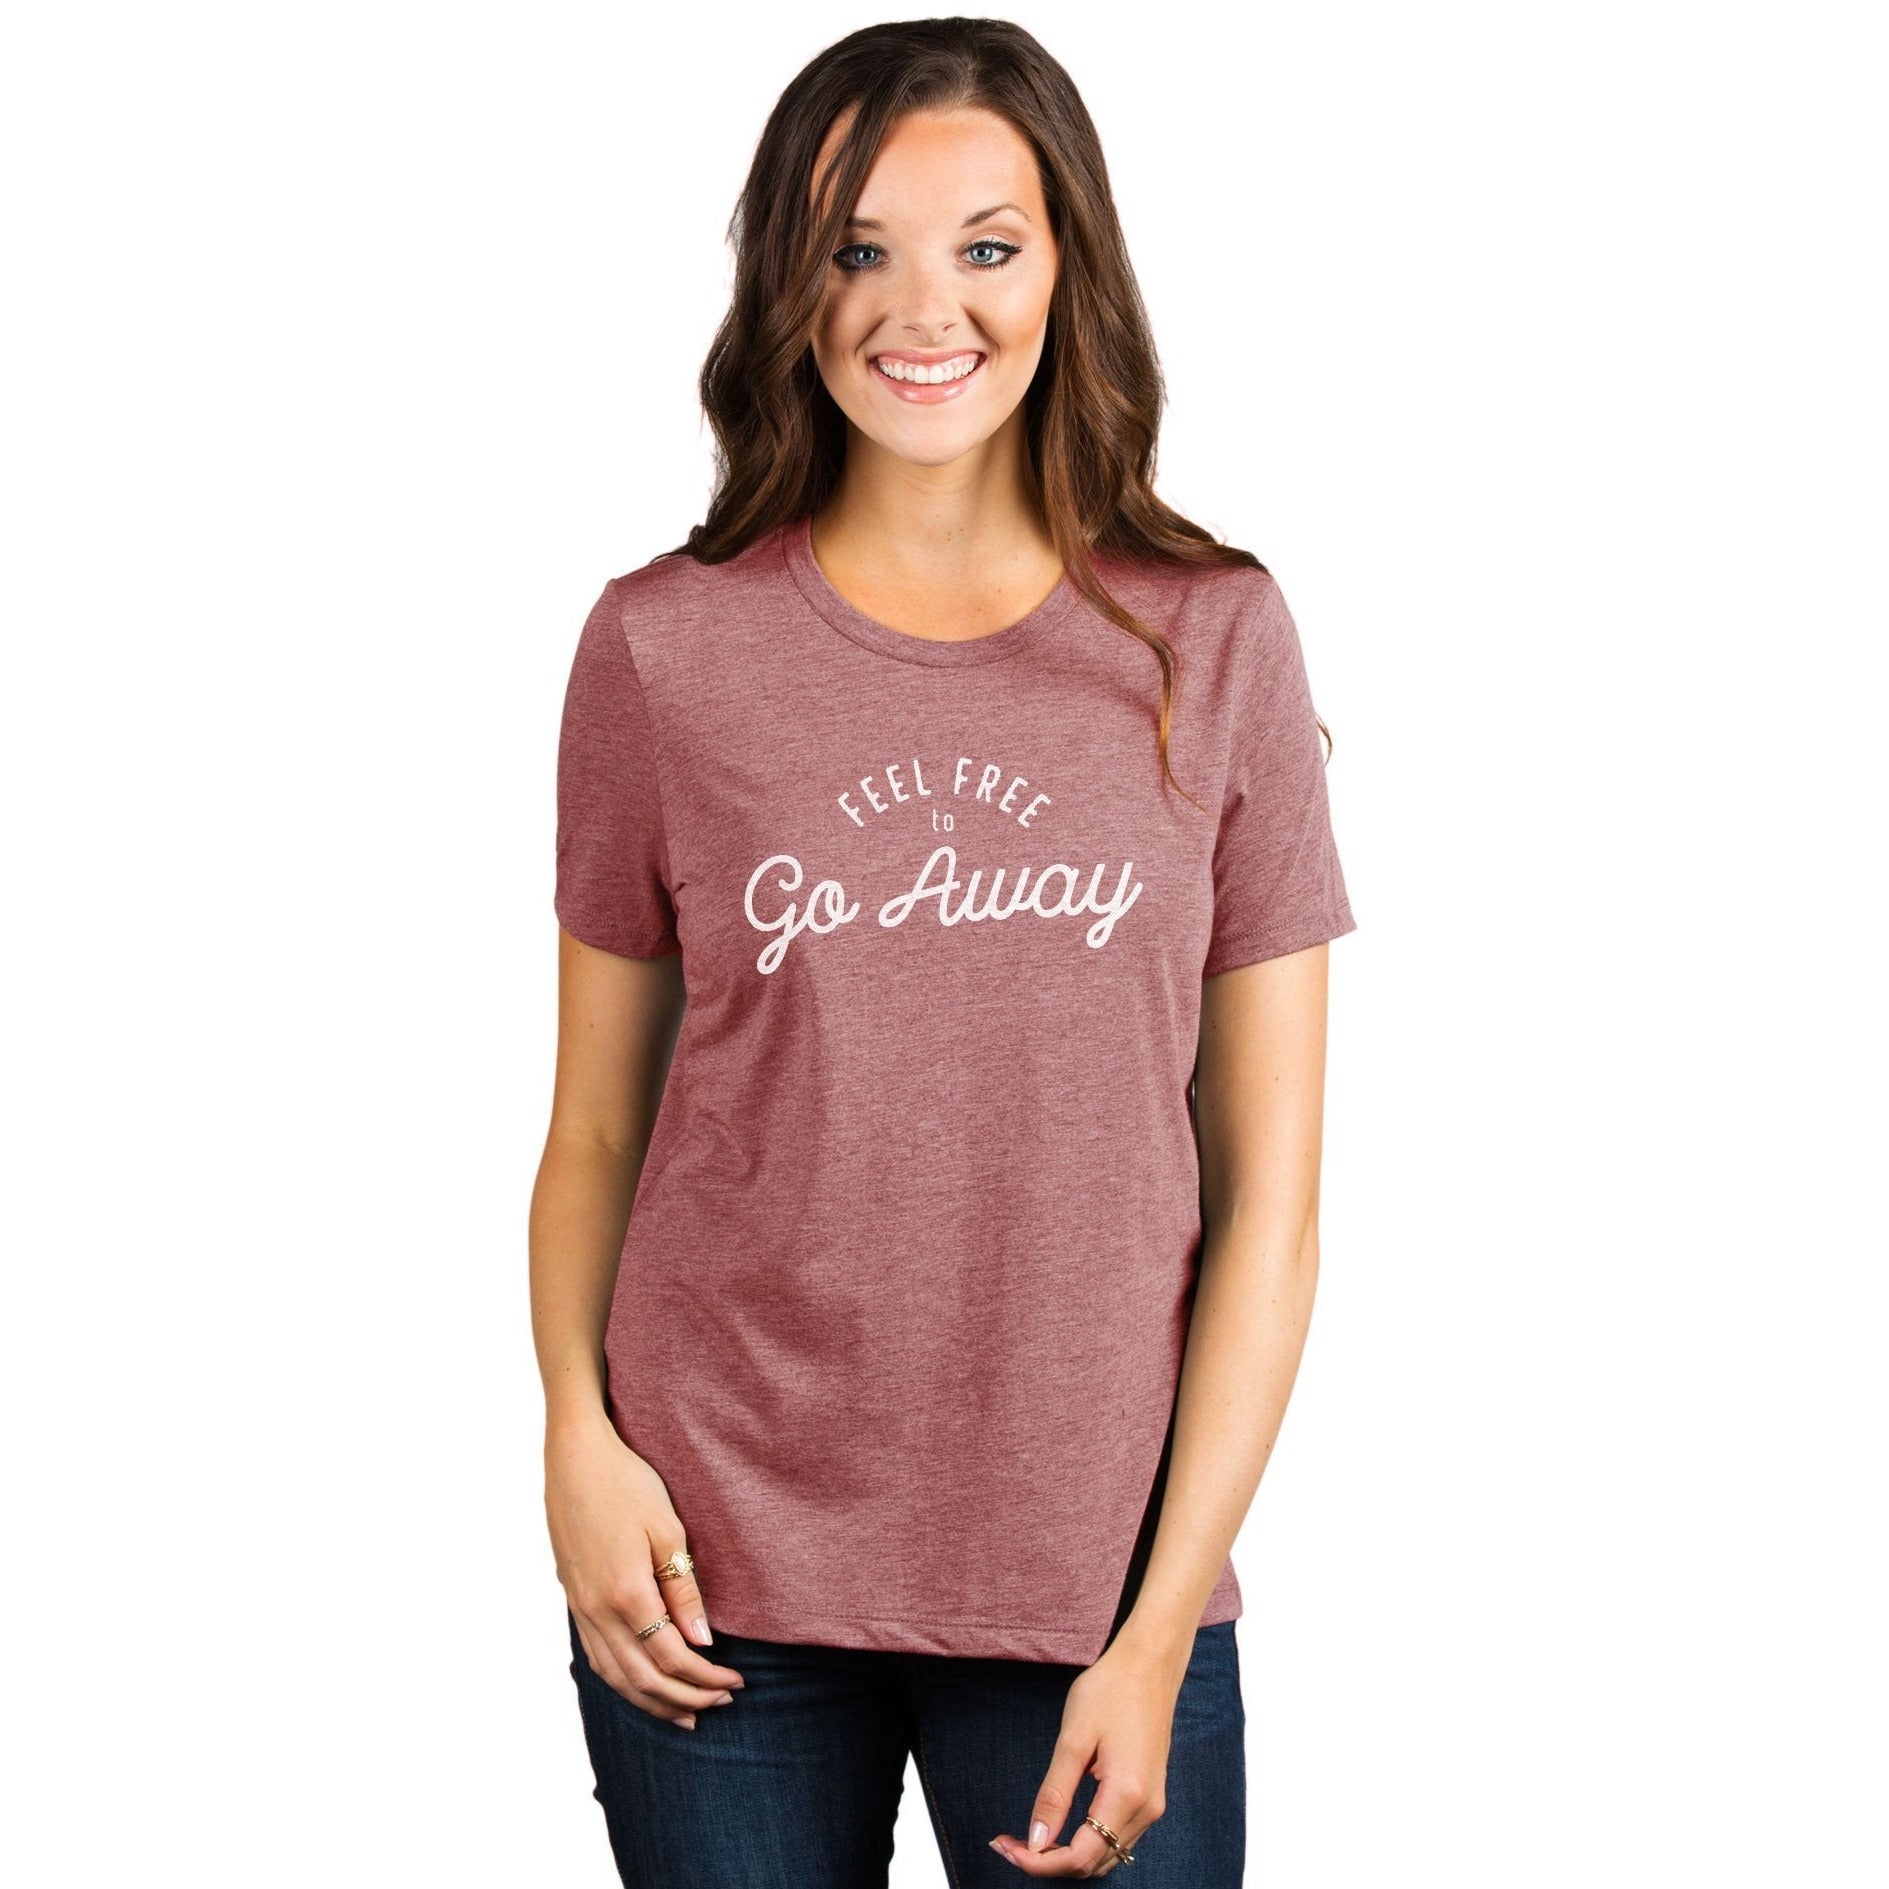 Feel Free To Go Away Women's Relaxed Crewneck T-Shirt Top Tee Heather Rouge Model
